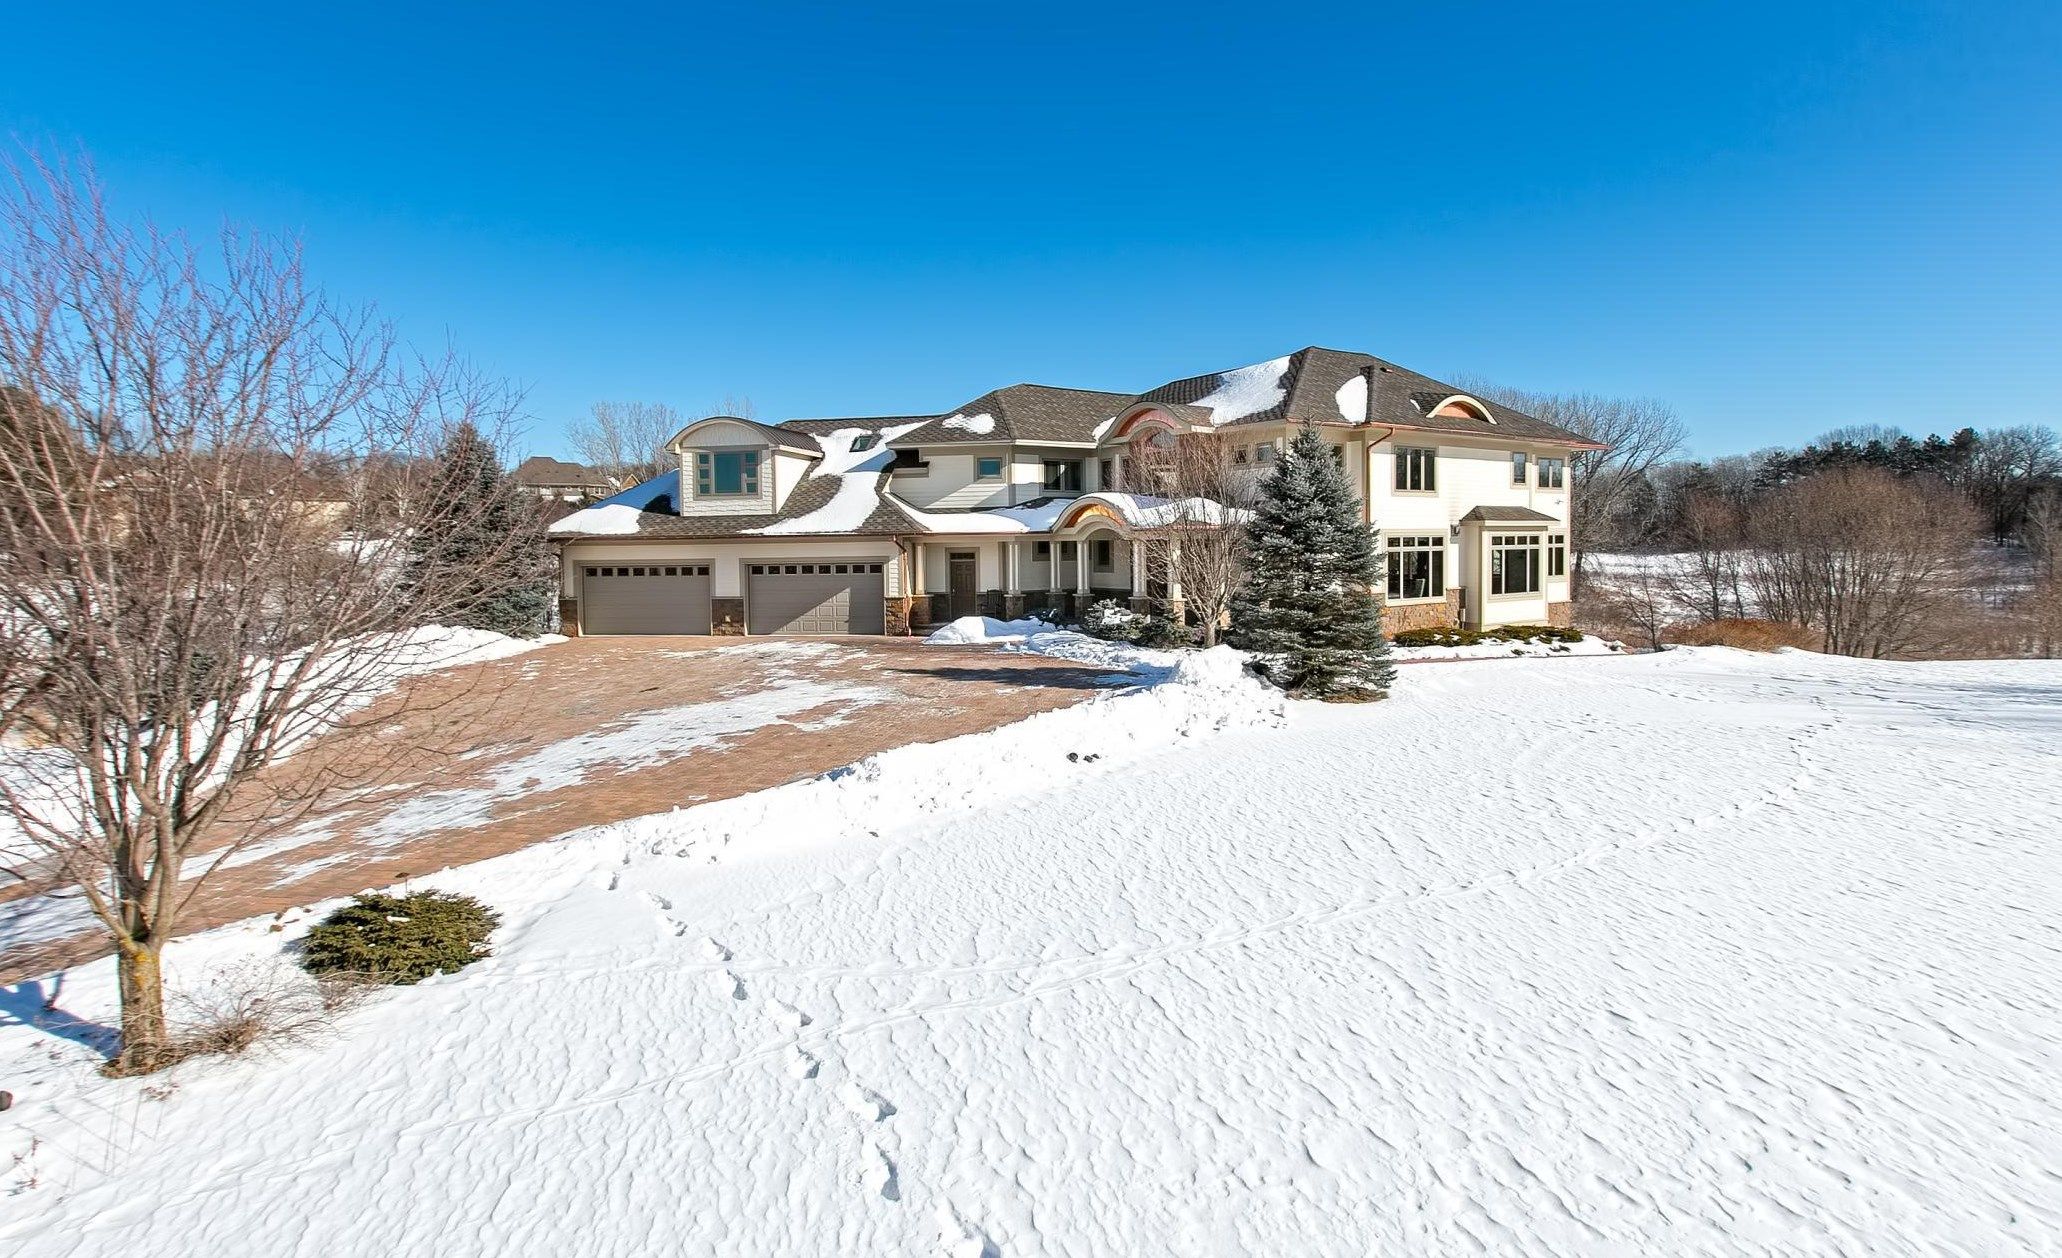 Exterior of Mike Zimmer's house. A pretty boring suburban home, with a white exterior and brown roof.